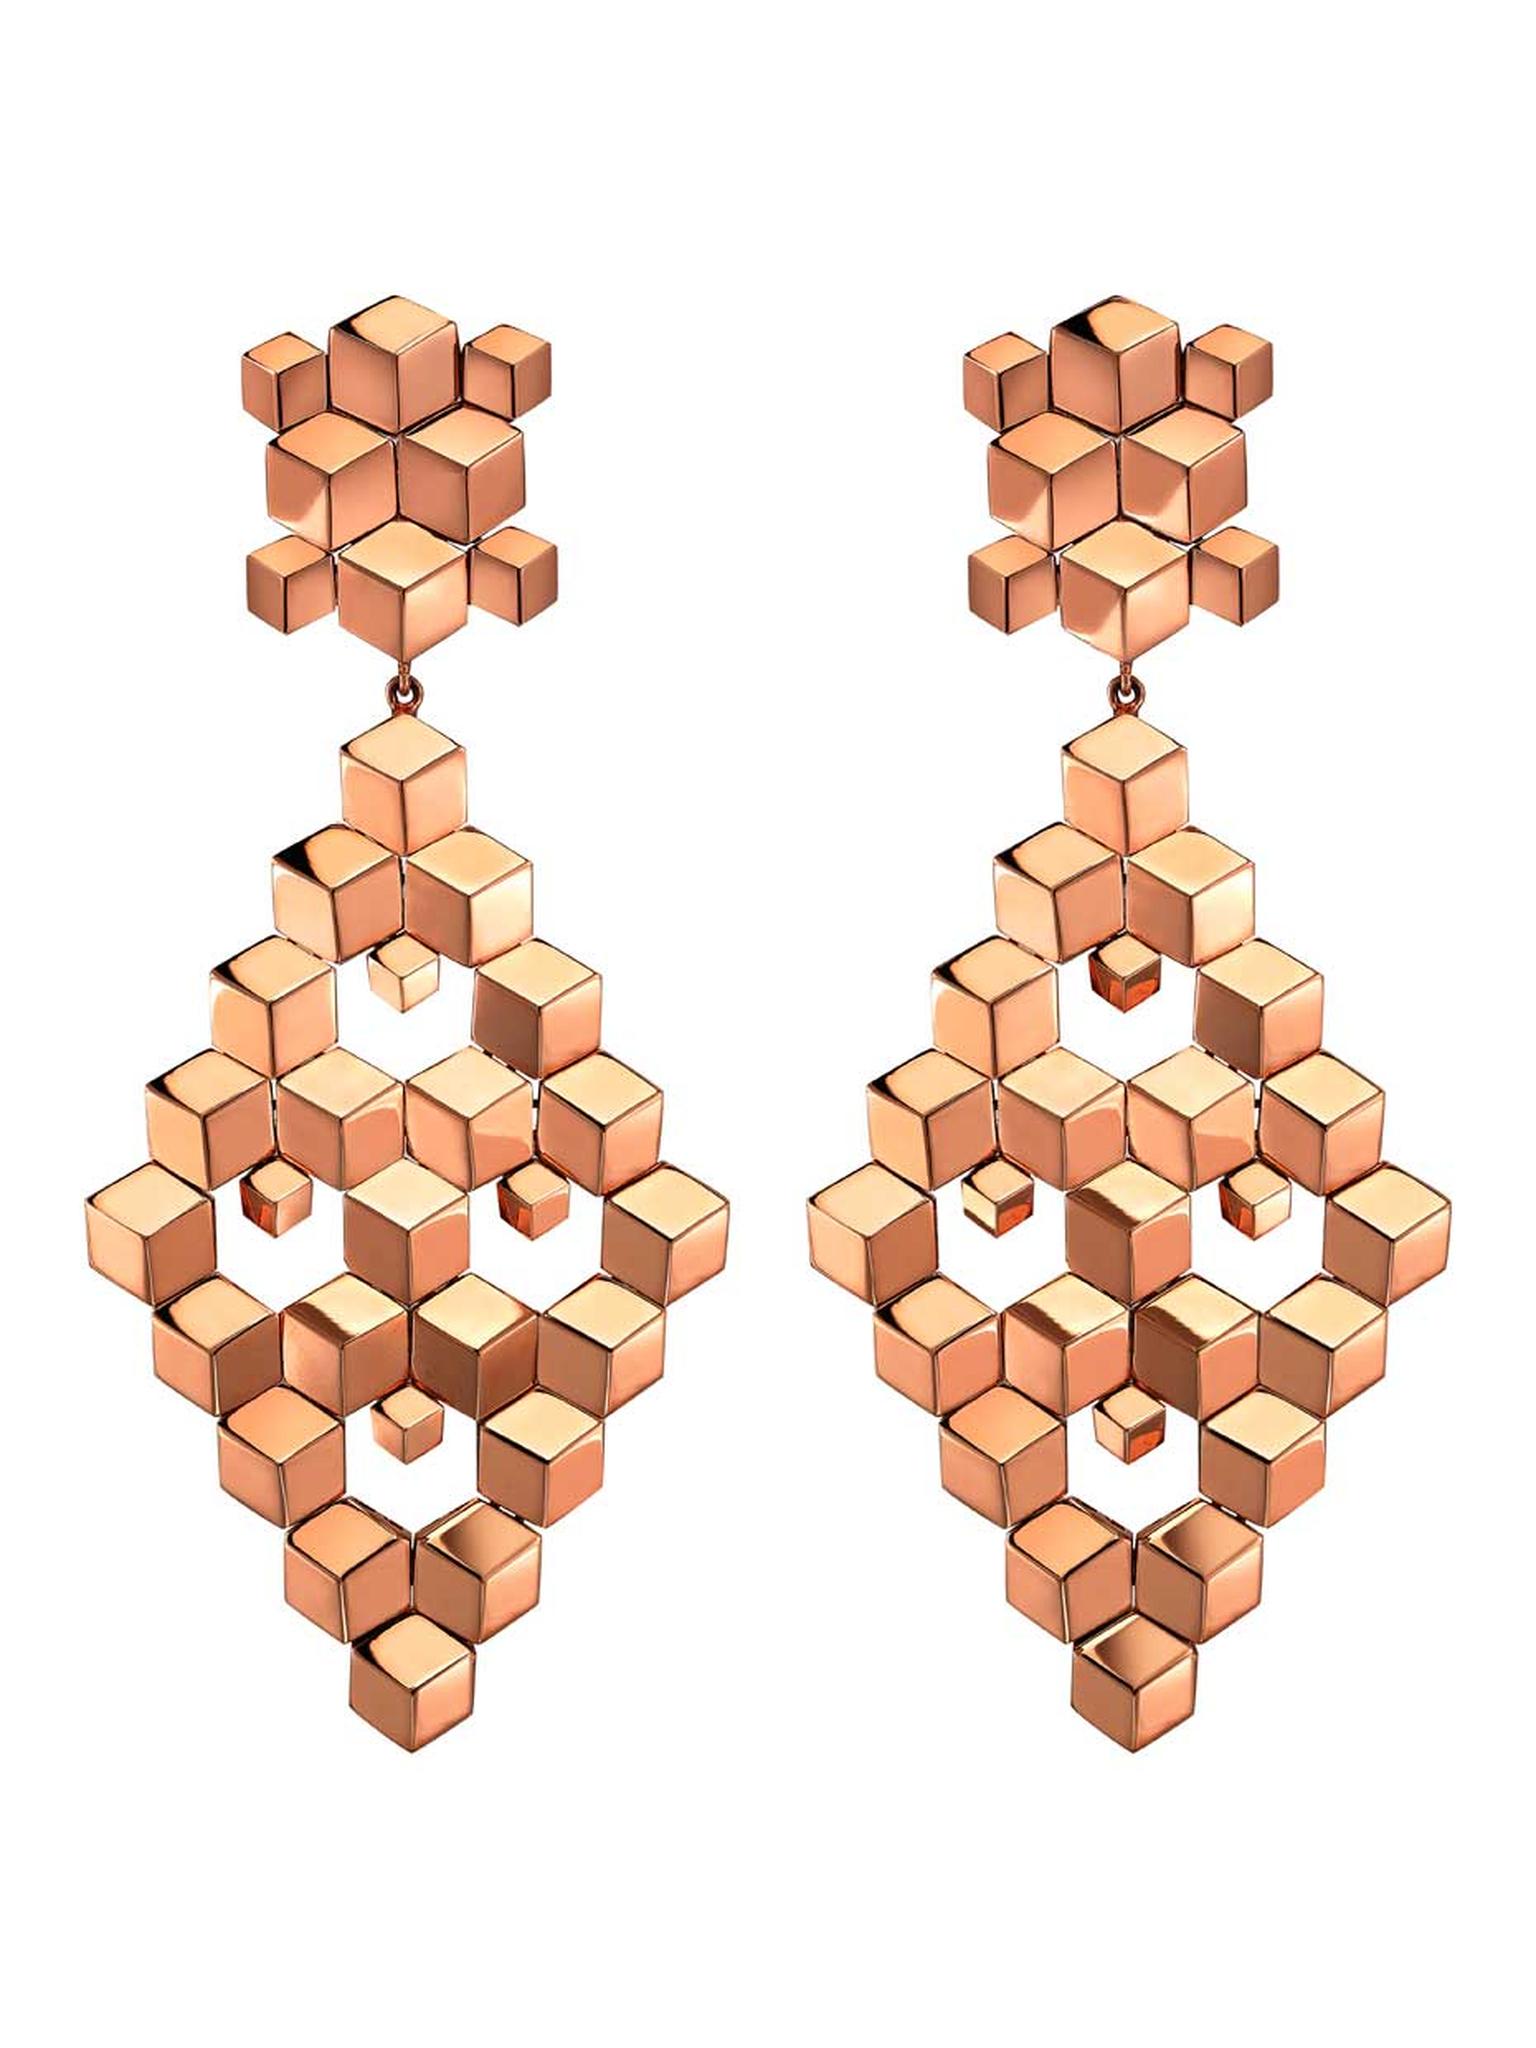 Pixelated jewels have flown the games console to conquer our hearts